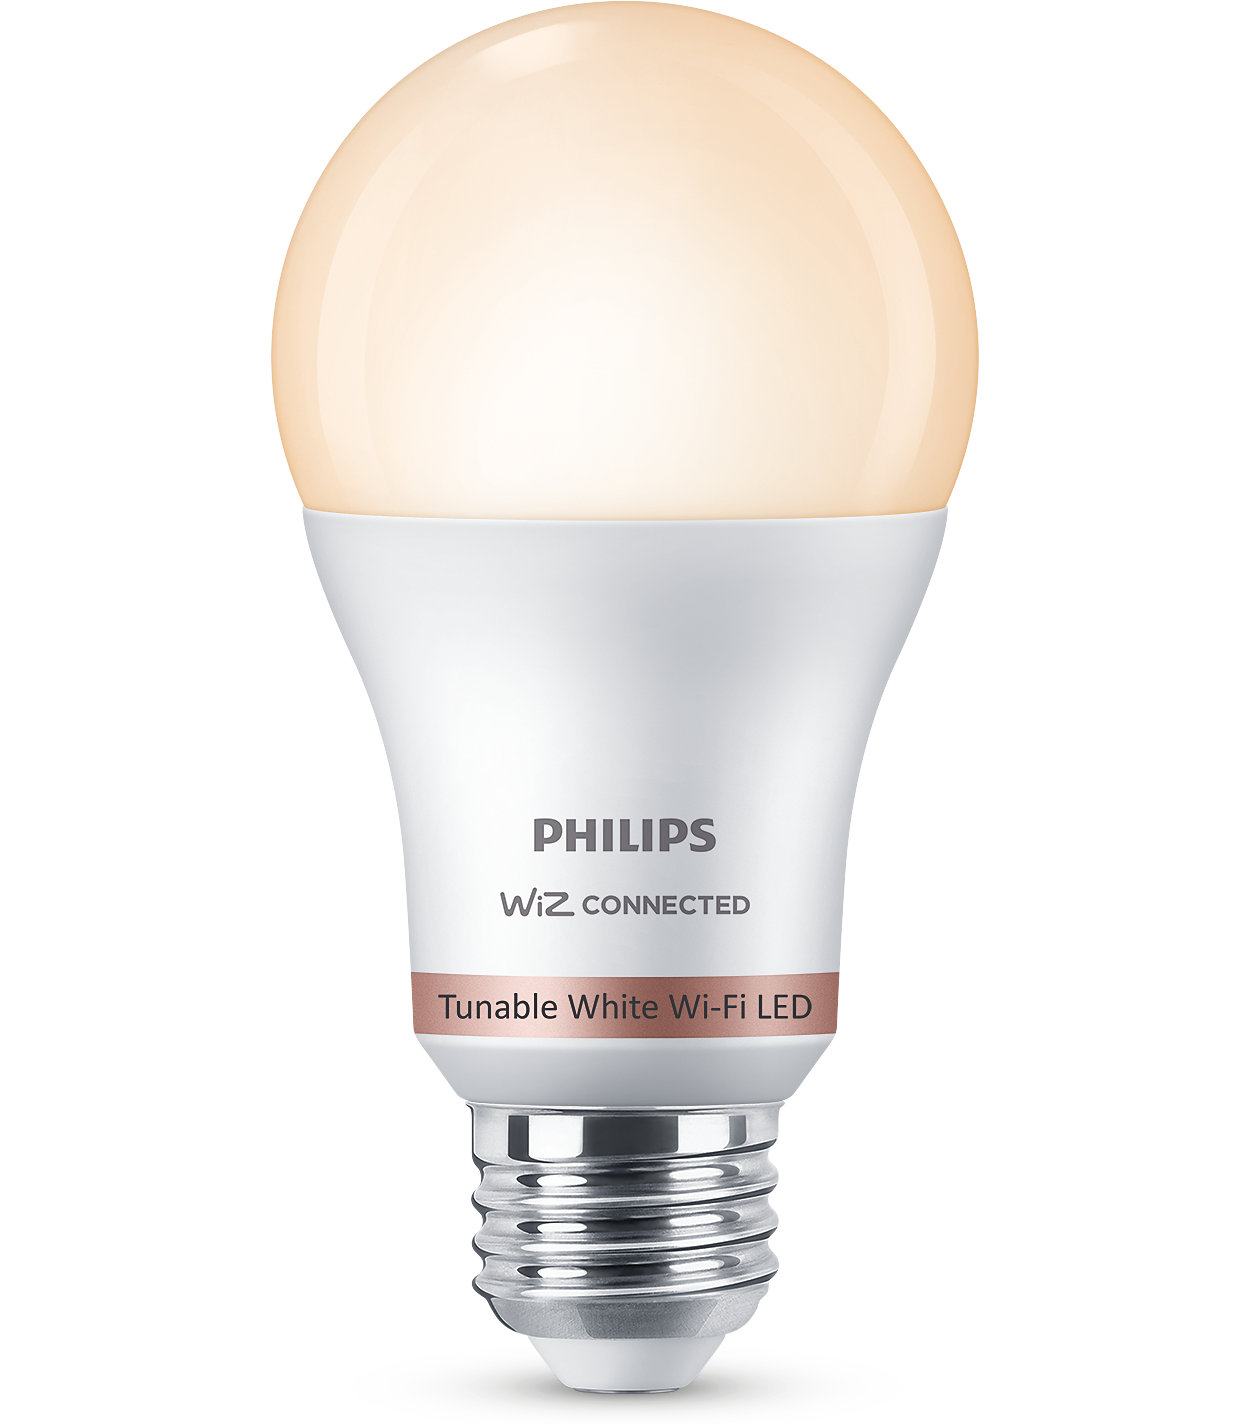 Easy-to-use smart tunable white bulb